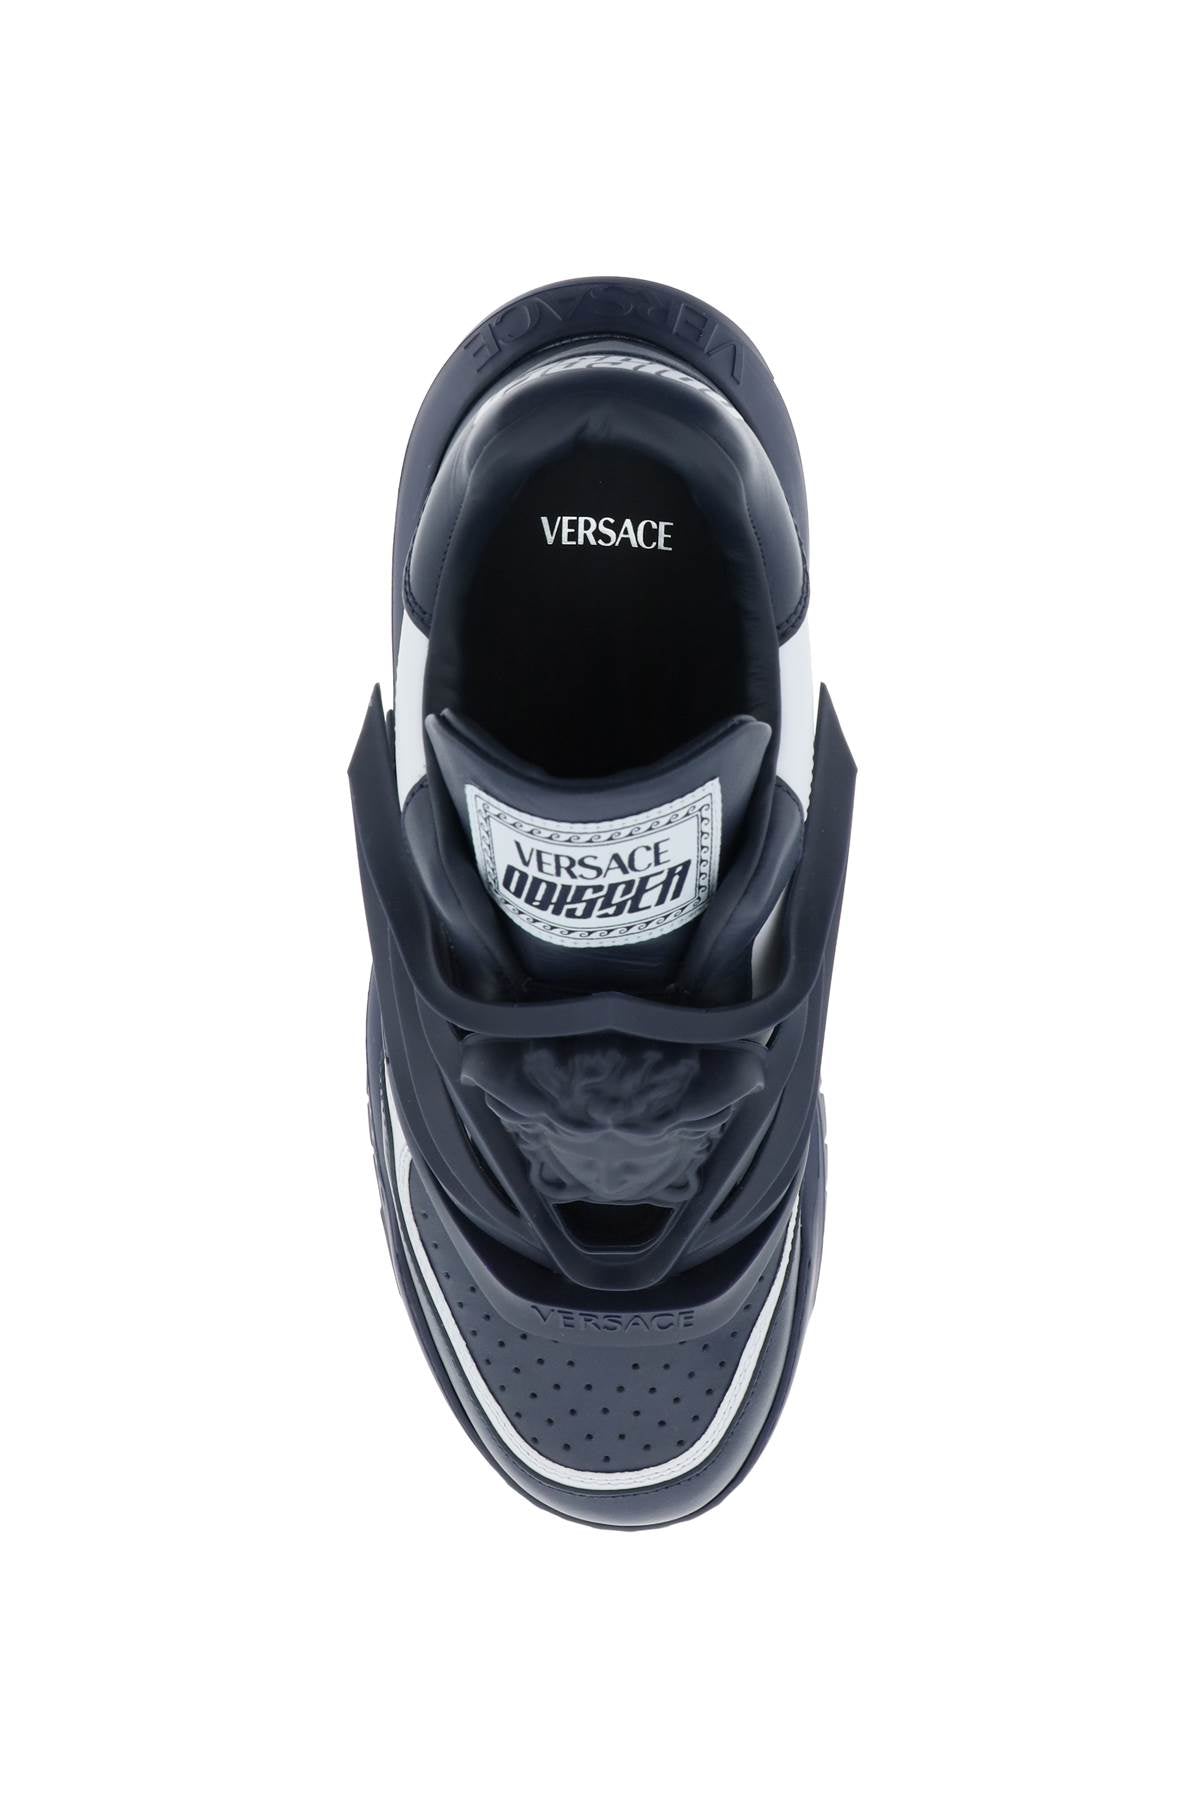 Versace Odissea Sneakers   White